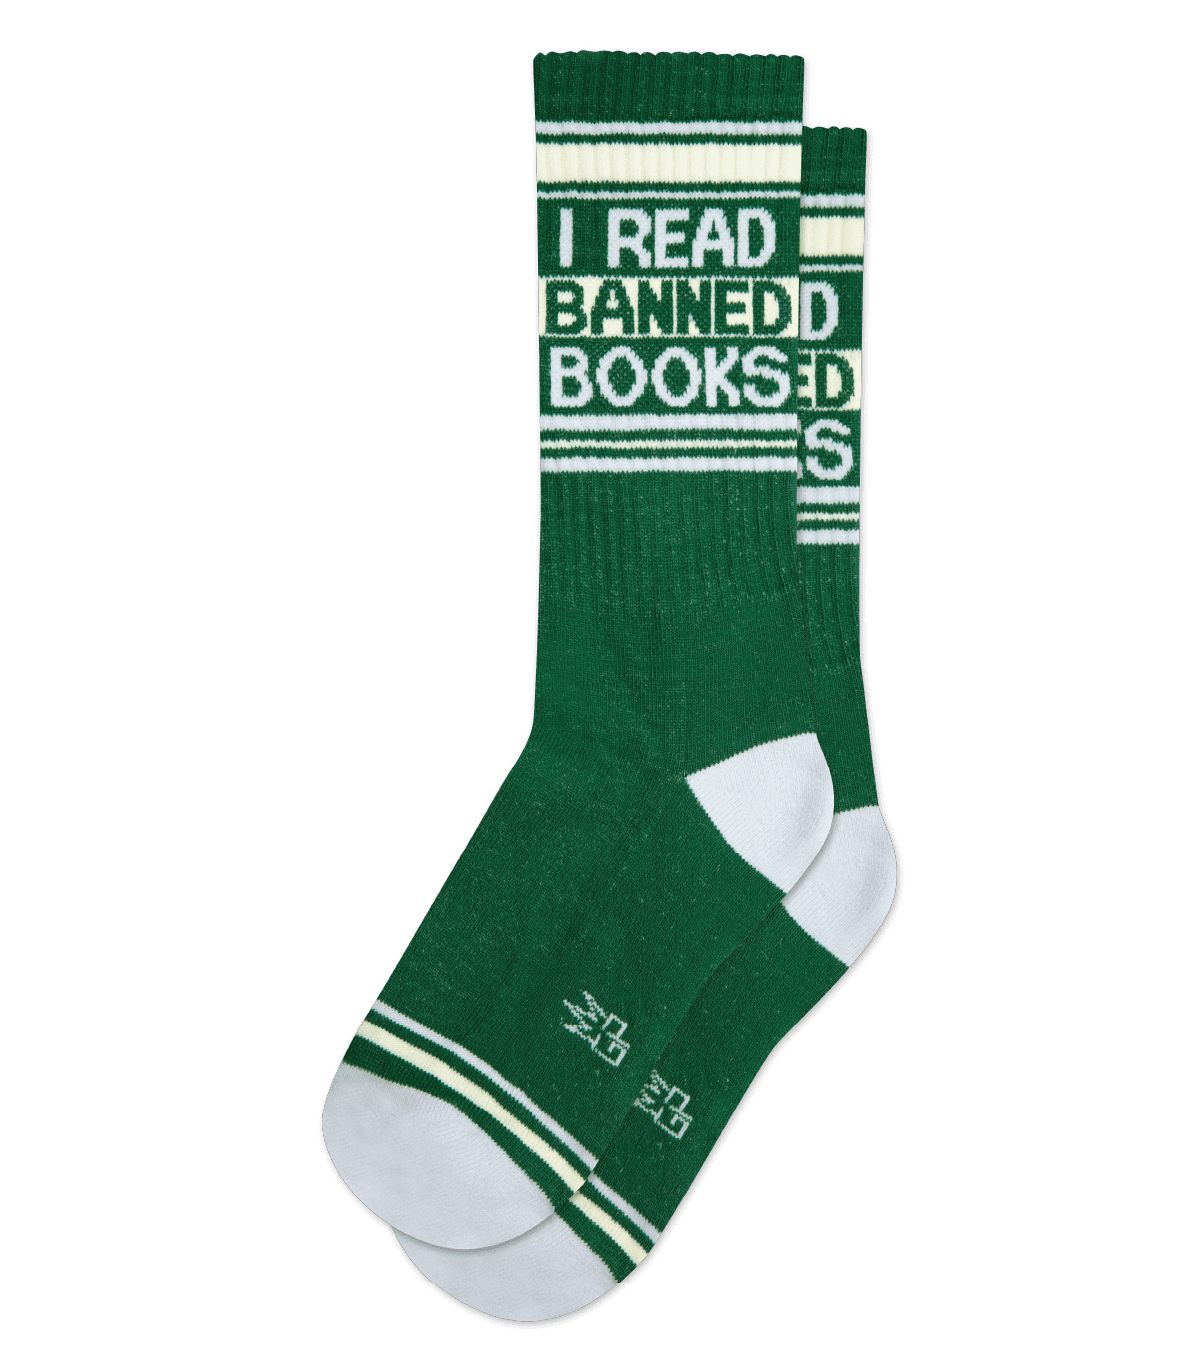 I READ BANNED BOOKS Gym Socks - Gumball Poodle - The Sock Monster